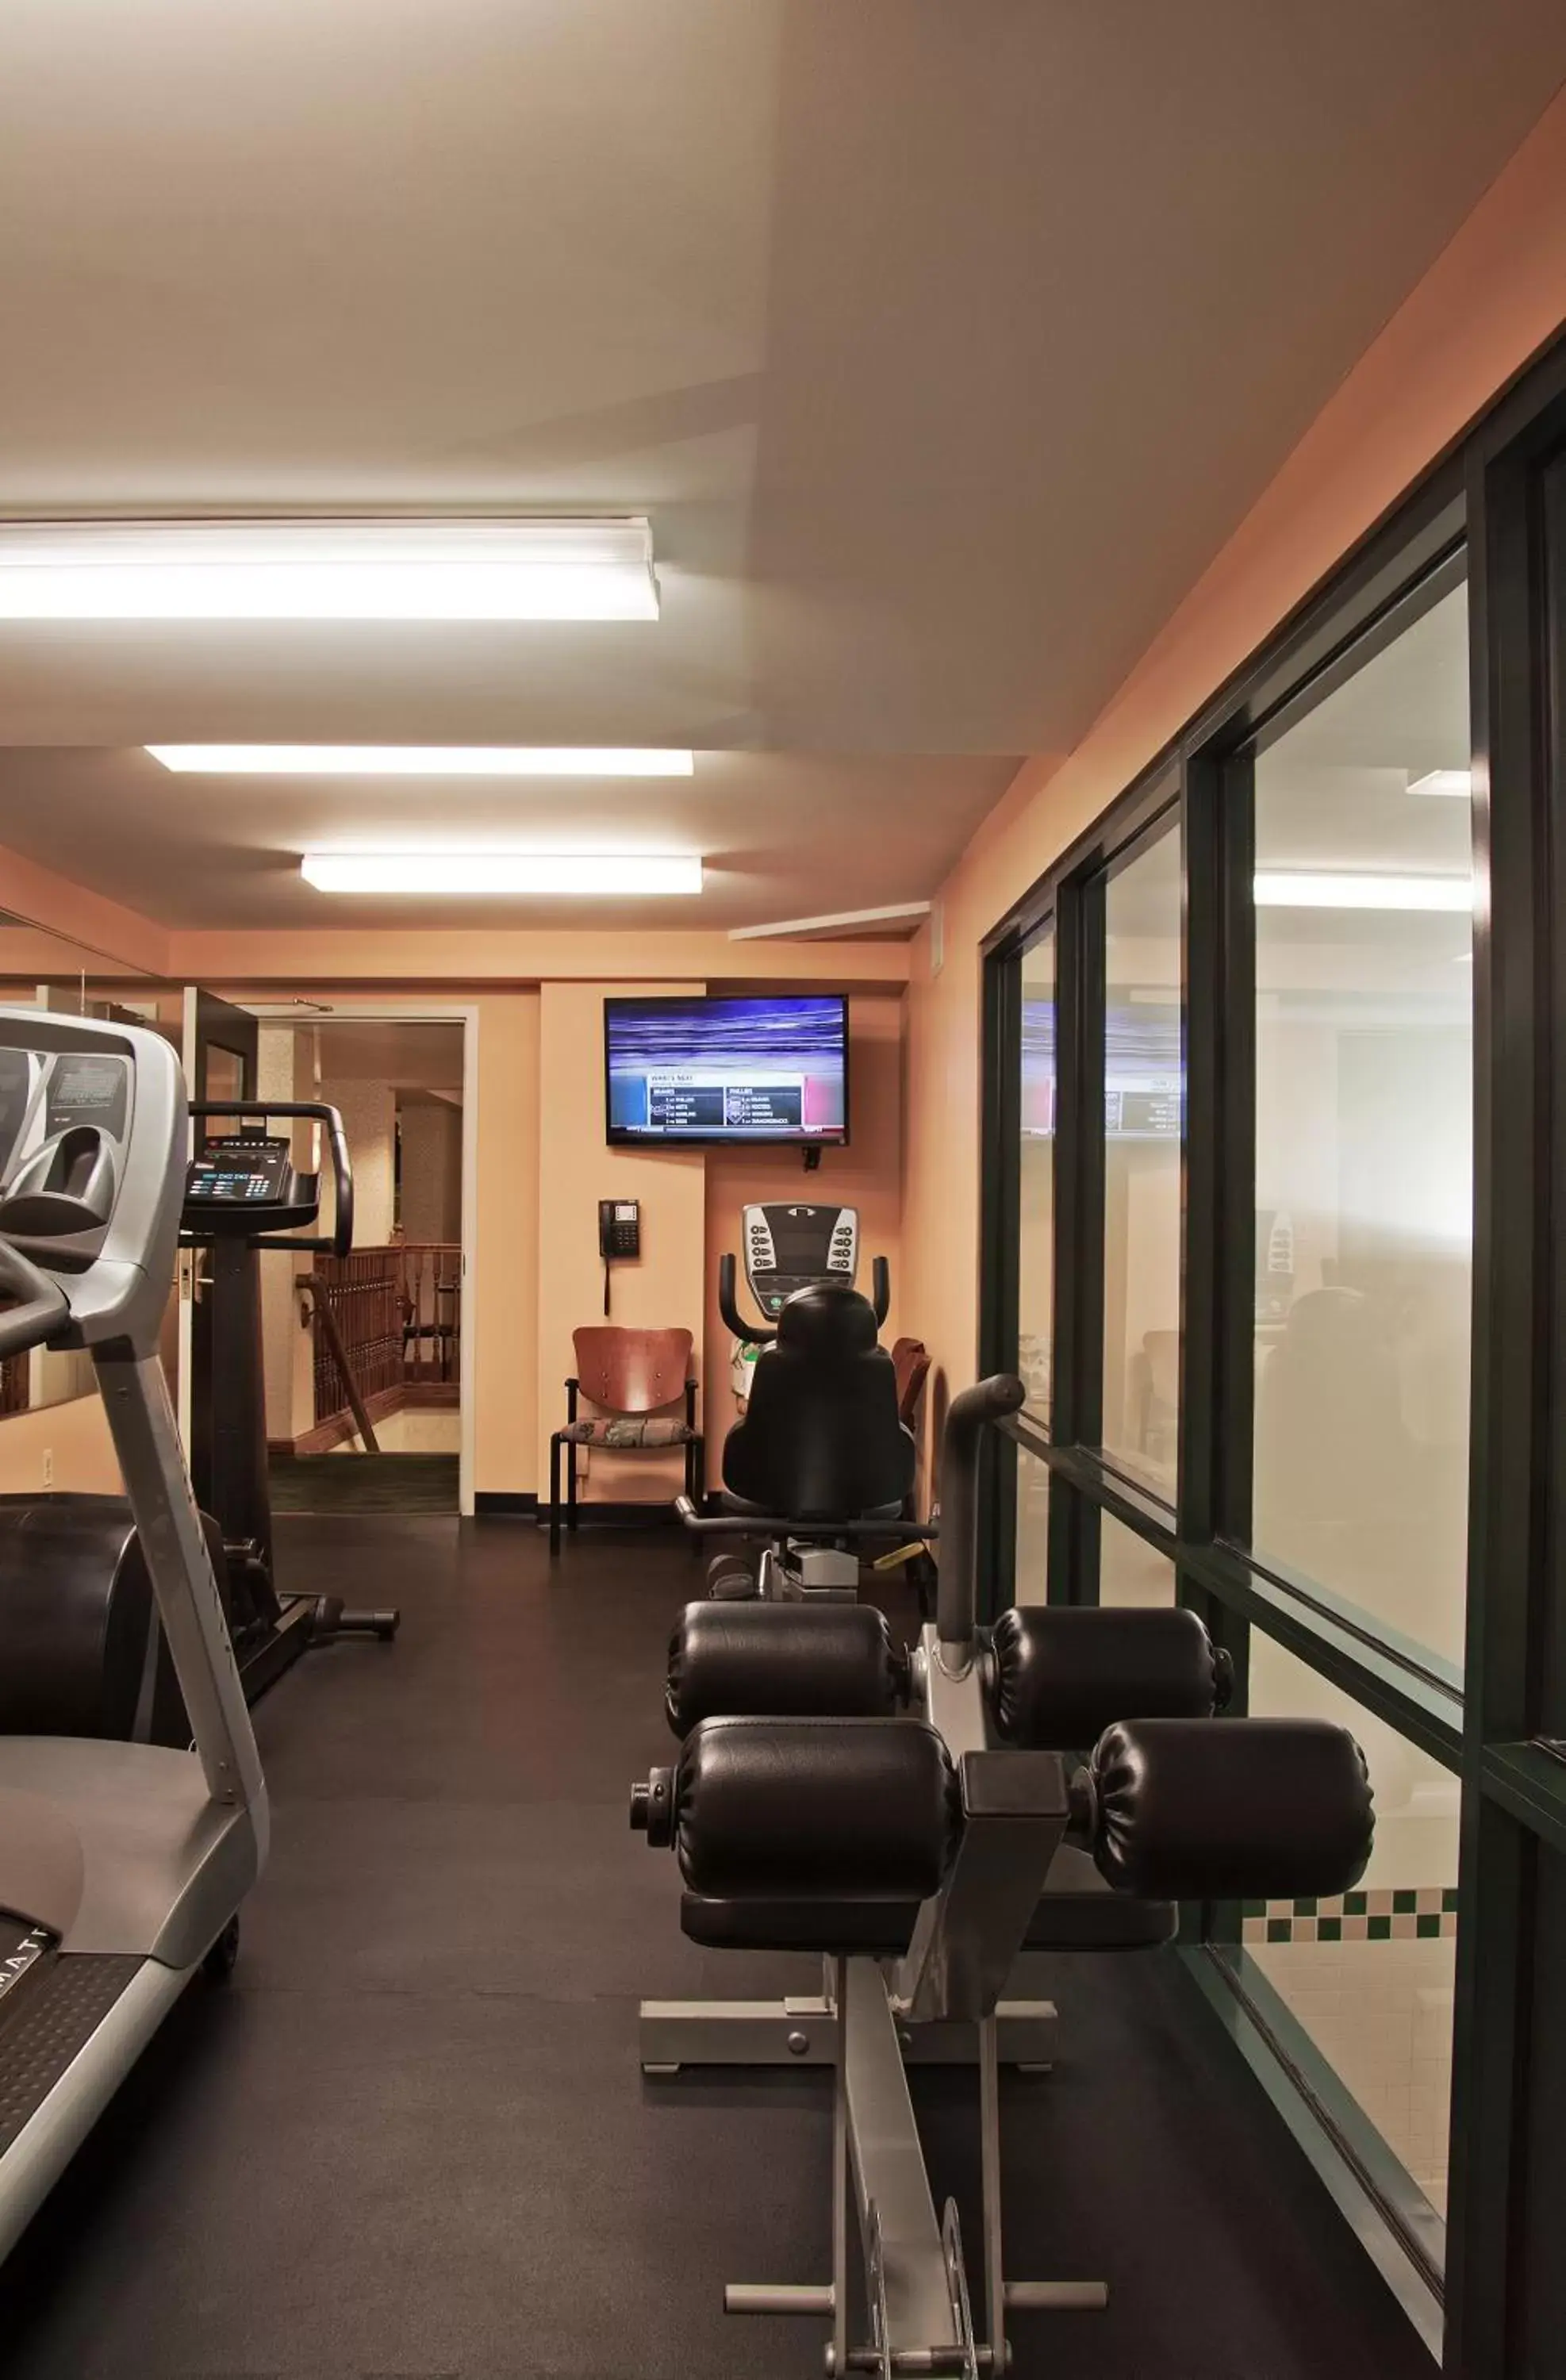 Fitness centre/facilities, Fitness Center/Facilities in D. Hotel Suites & Spa